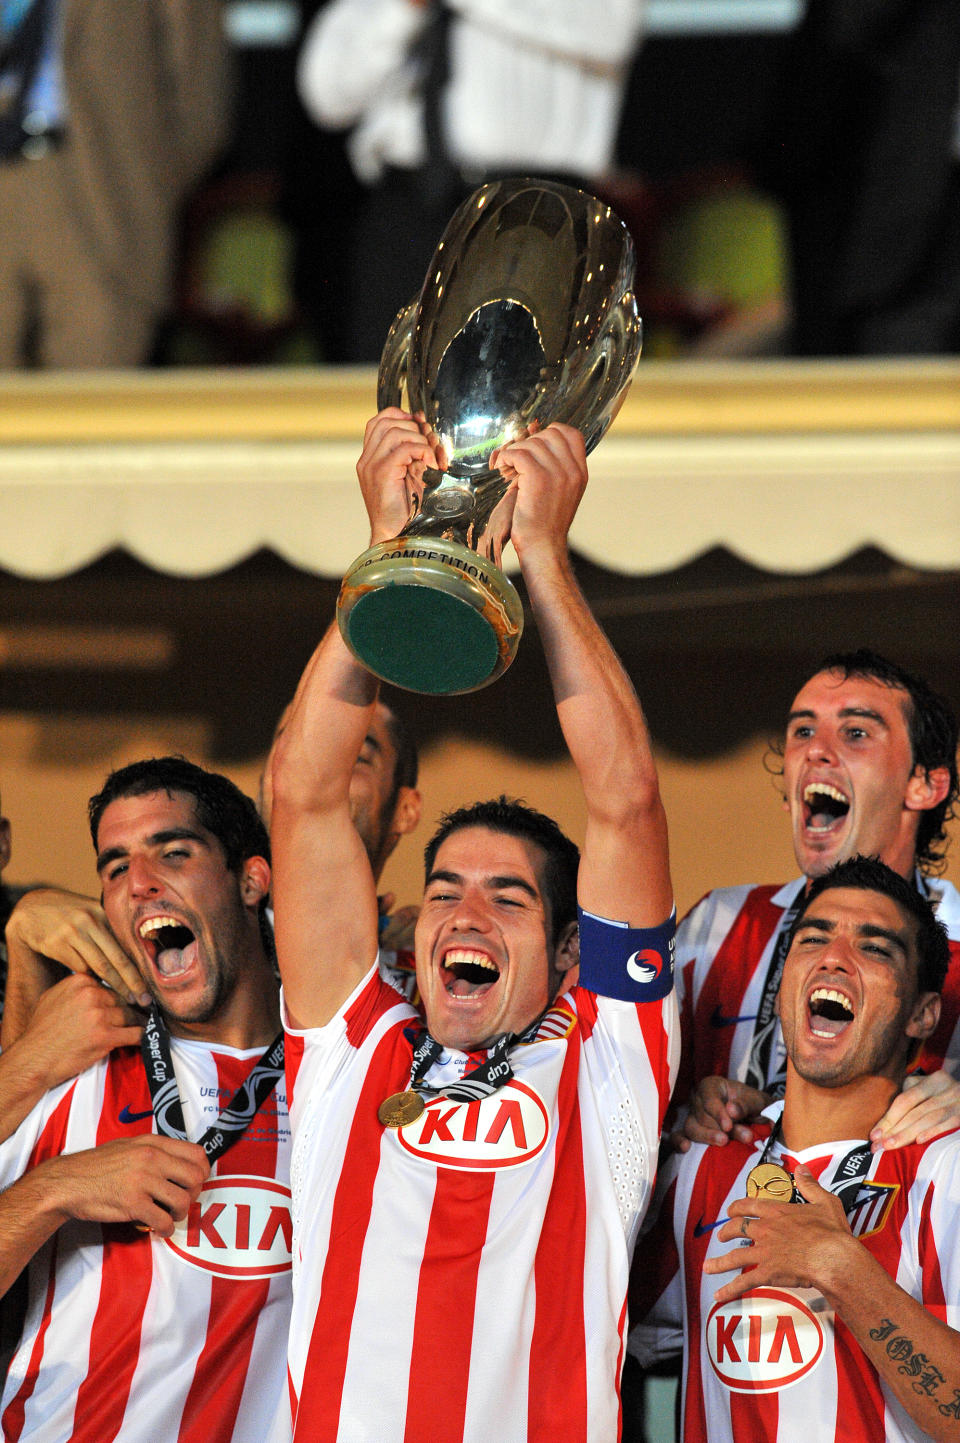 Atletico Madrid's Antonio Lopez (holding cup) celebrates Super Cup victory with Raul Garcia (left) and Reyes (right) (Photo by Neal Simpson - EMPICS/PA Images via Getty Images)